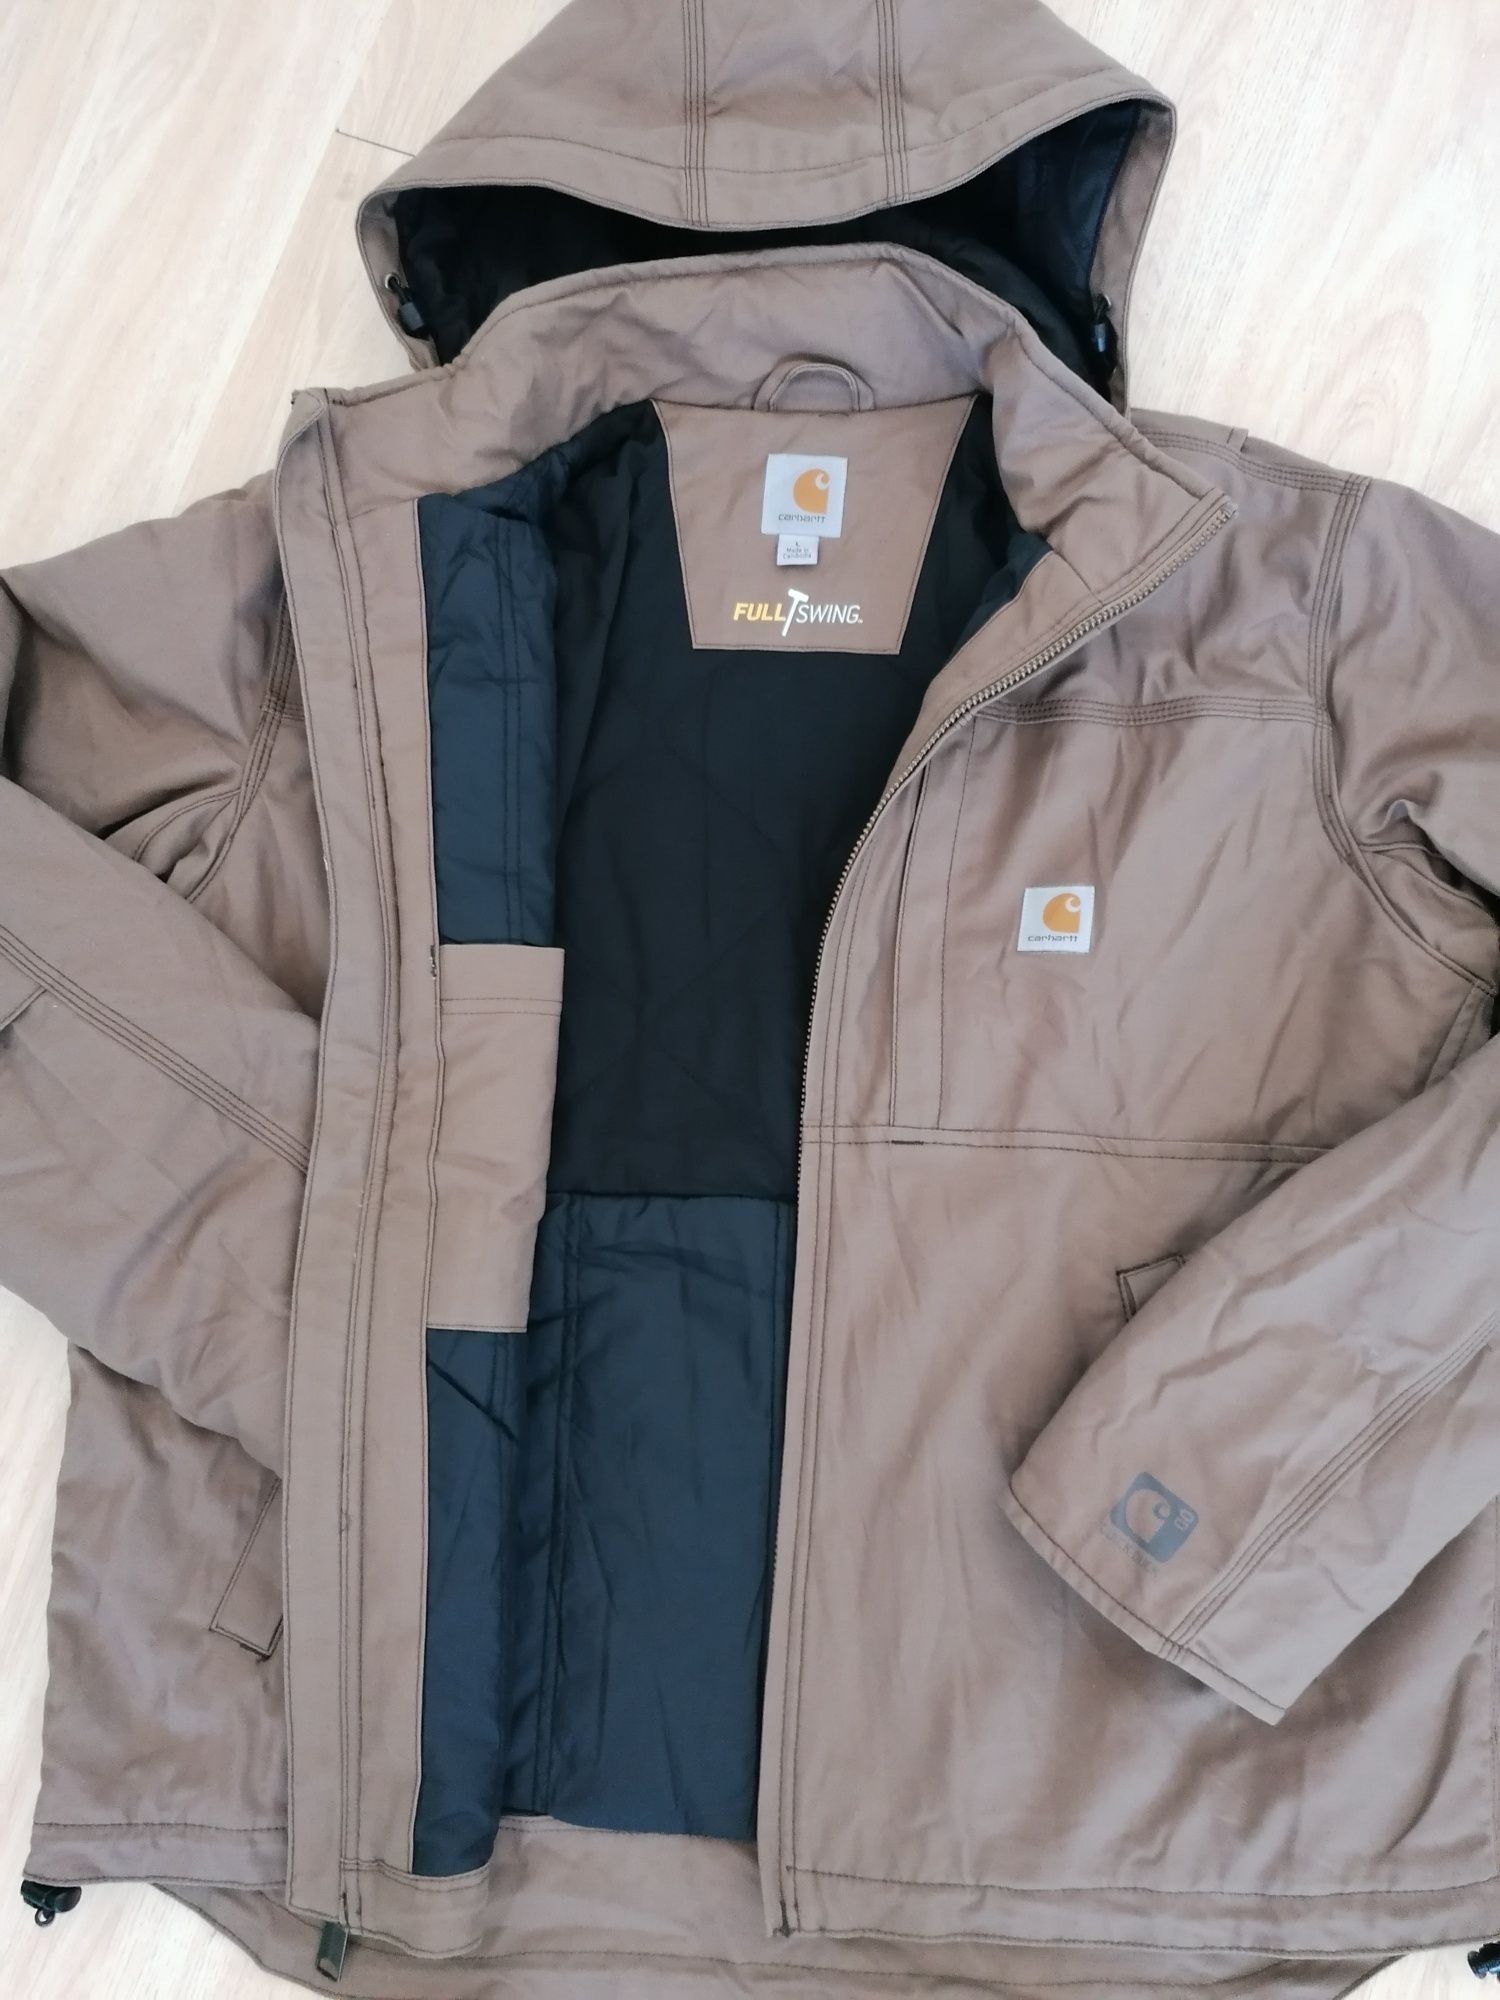 Carhartt full swing cryder loose fit quick duck